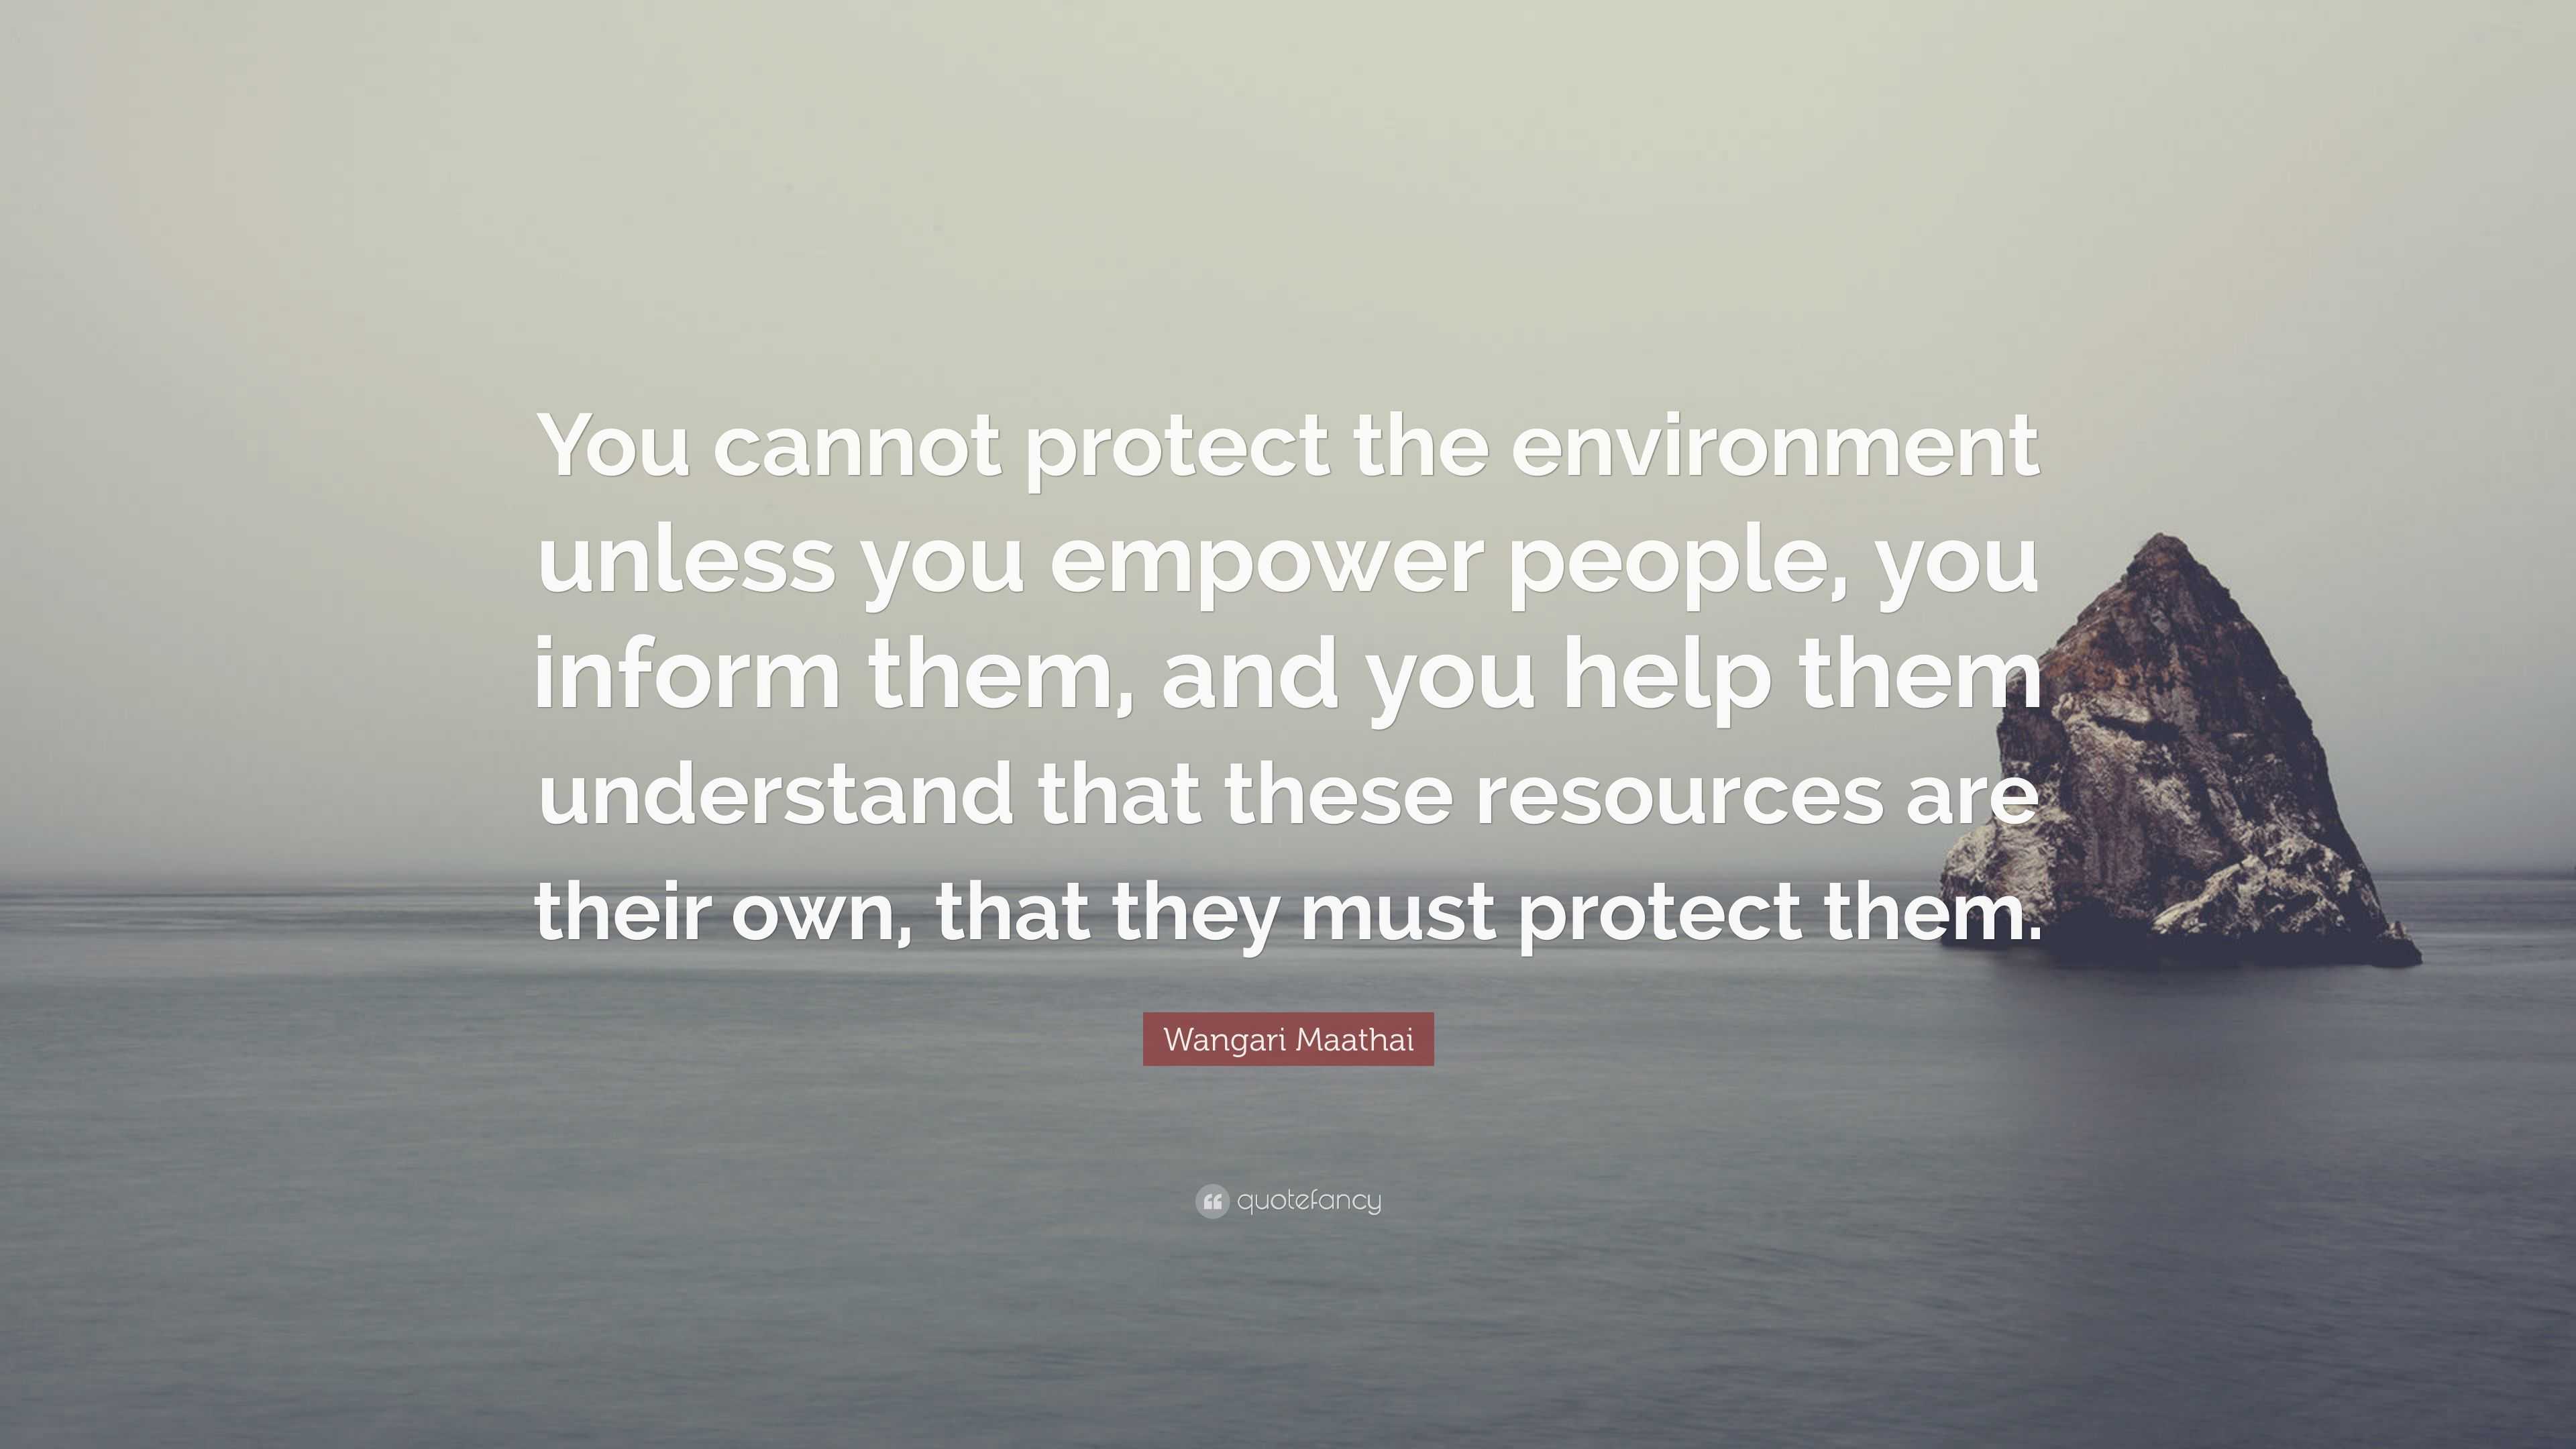 Wangari Maathai Quote: “You cannot protect the environment unless you